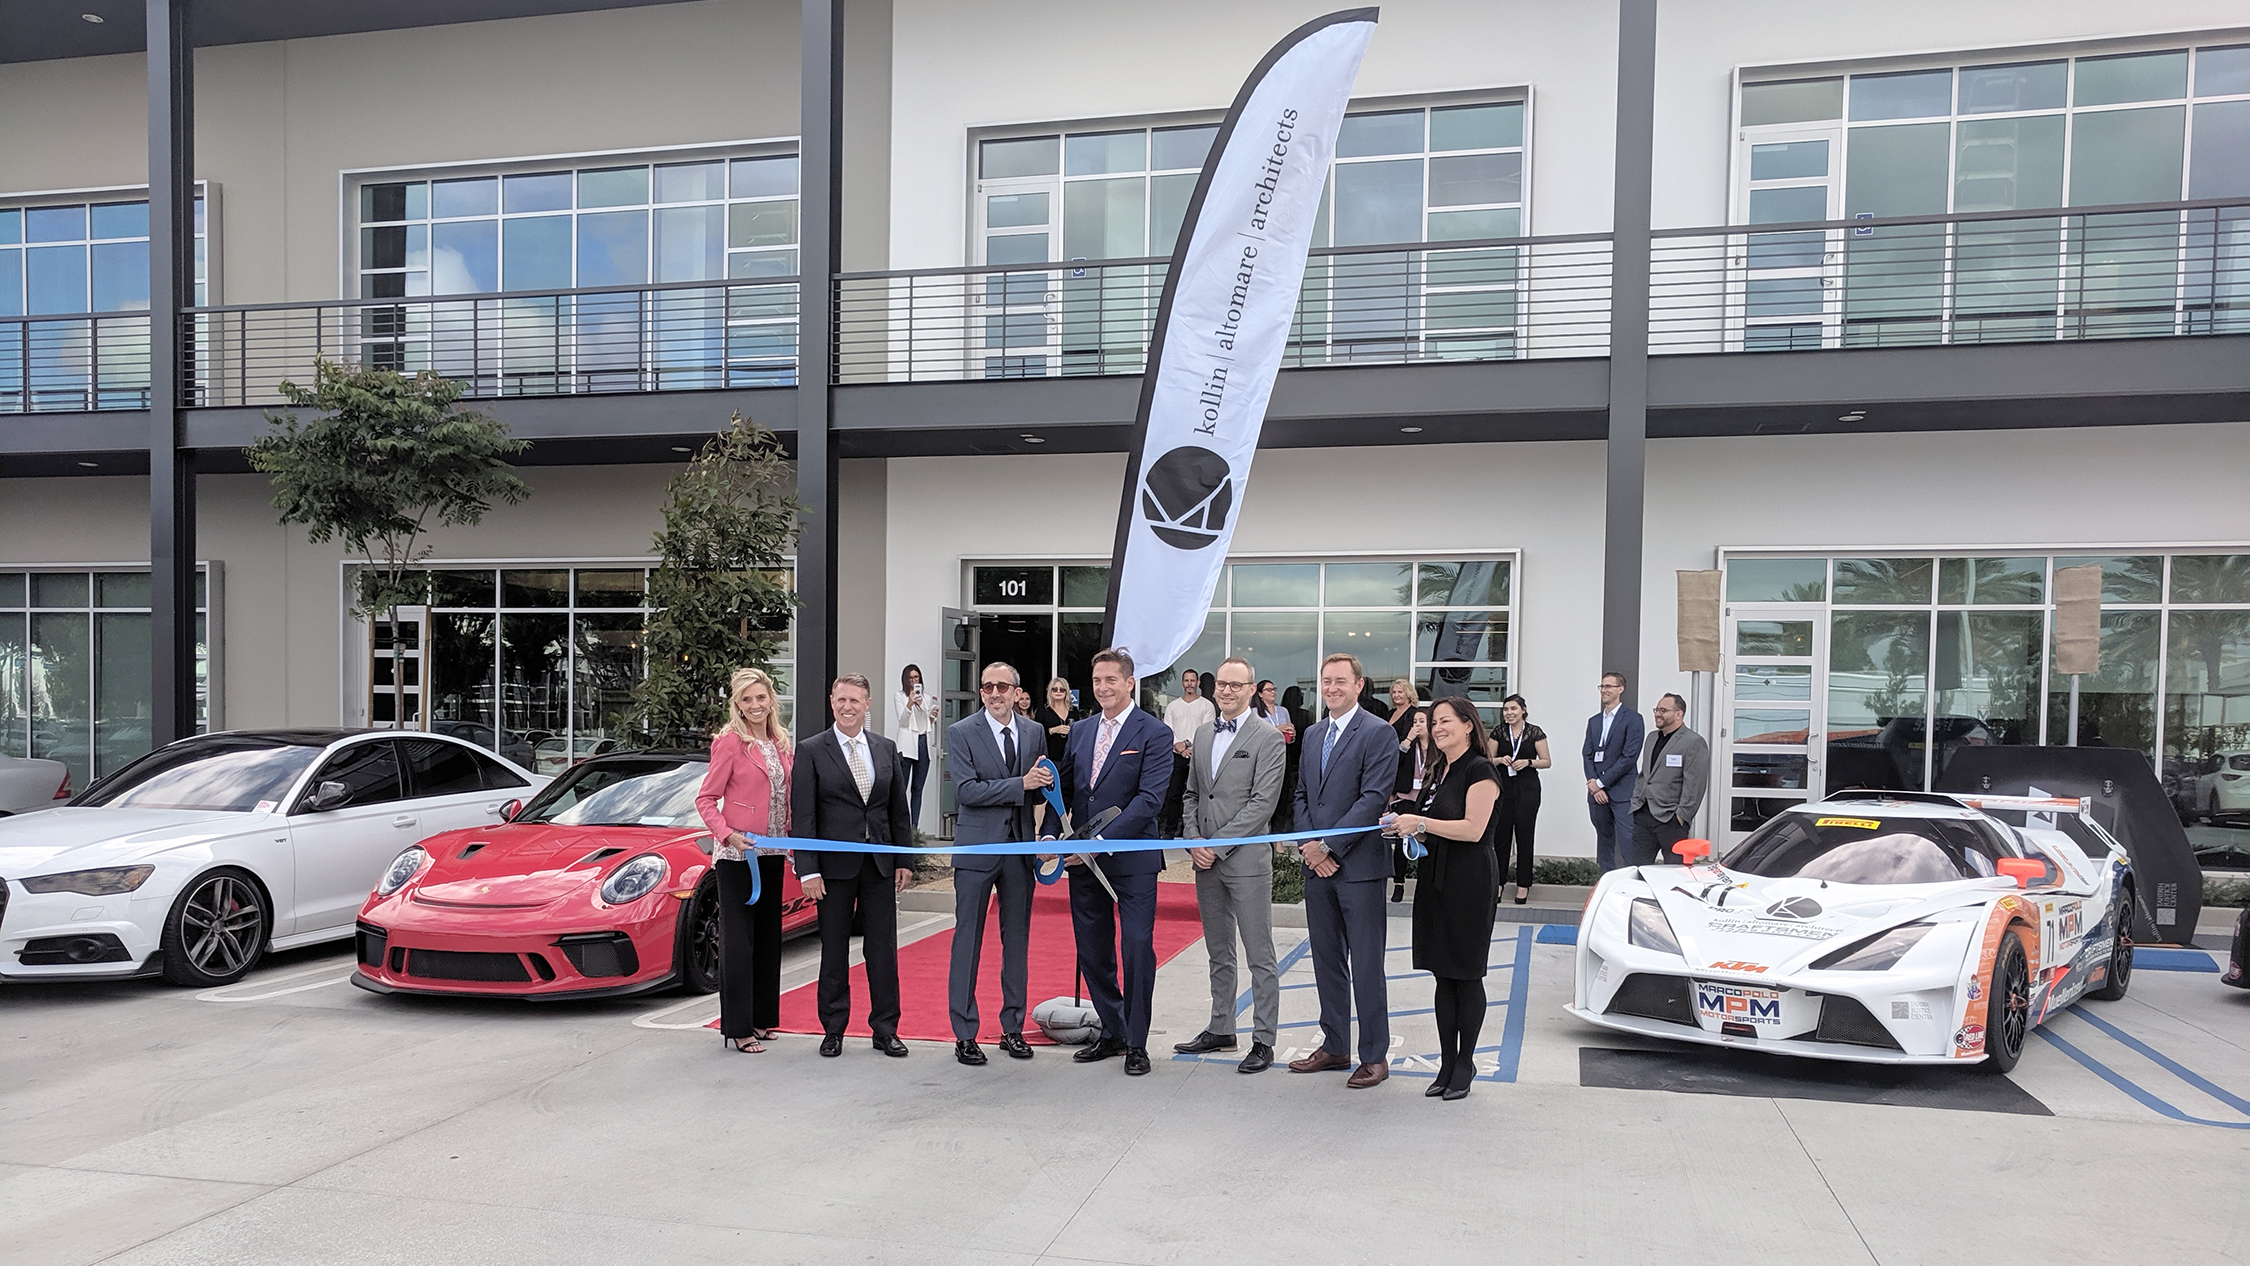 Long Beach Office Open House & Ribbon Cutting Ceremony